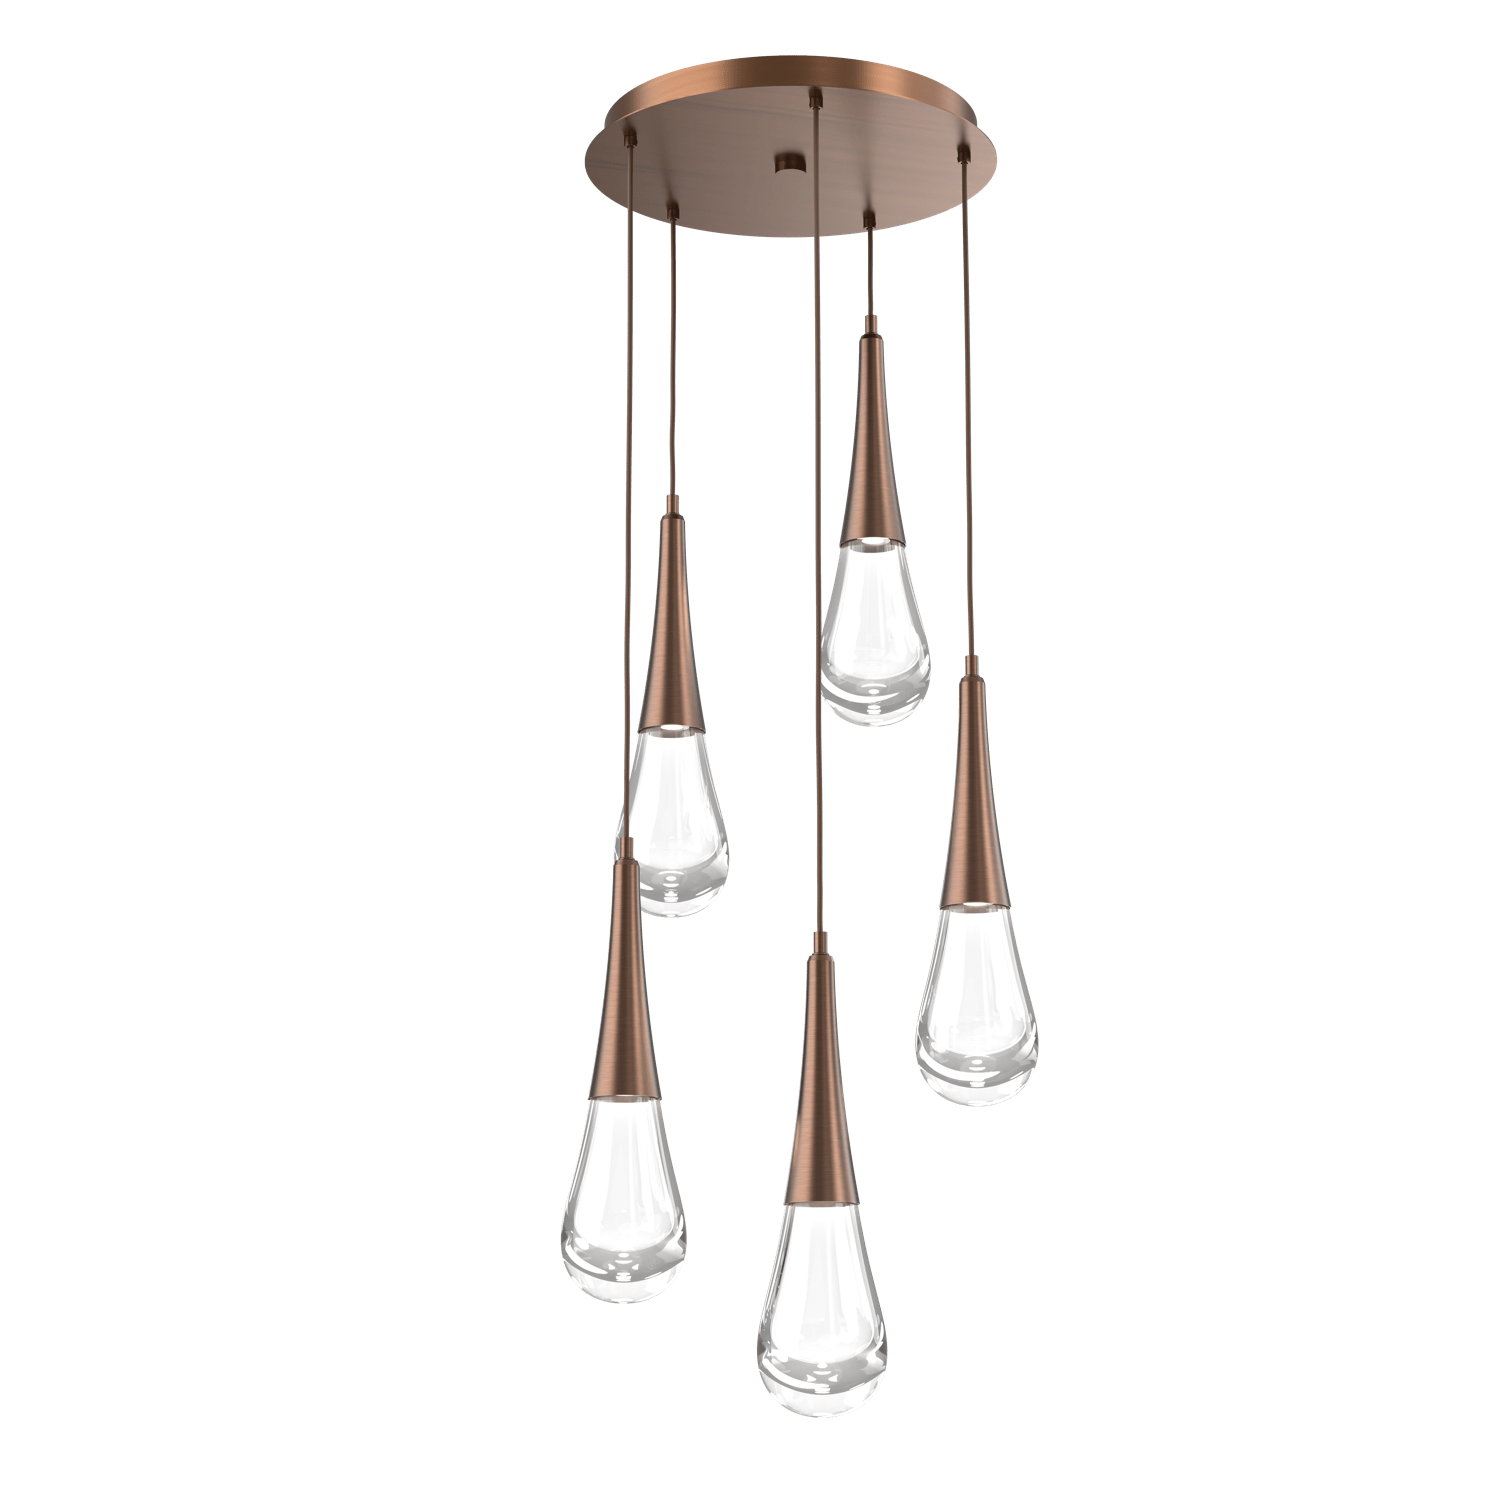 CHB0078-05-RB-Hammerton-Studio-Raindrop-5-light-round-pendant-chandelier-with-oil-rubbed-bronze-finish-and-clear-blown-glass-shades-and-LED-lamping